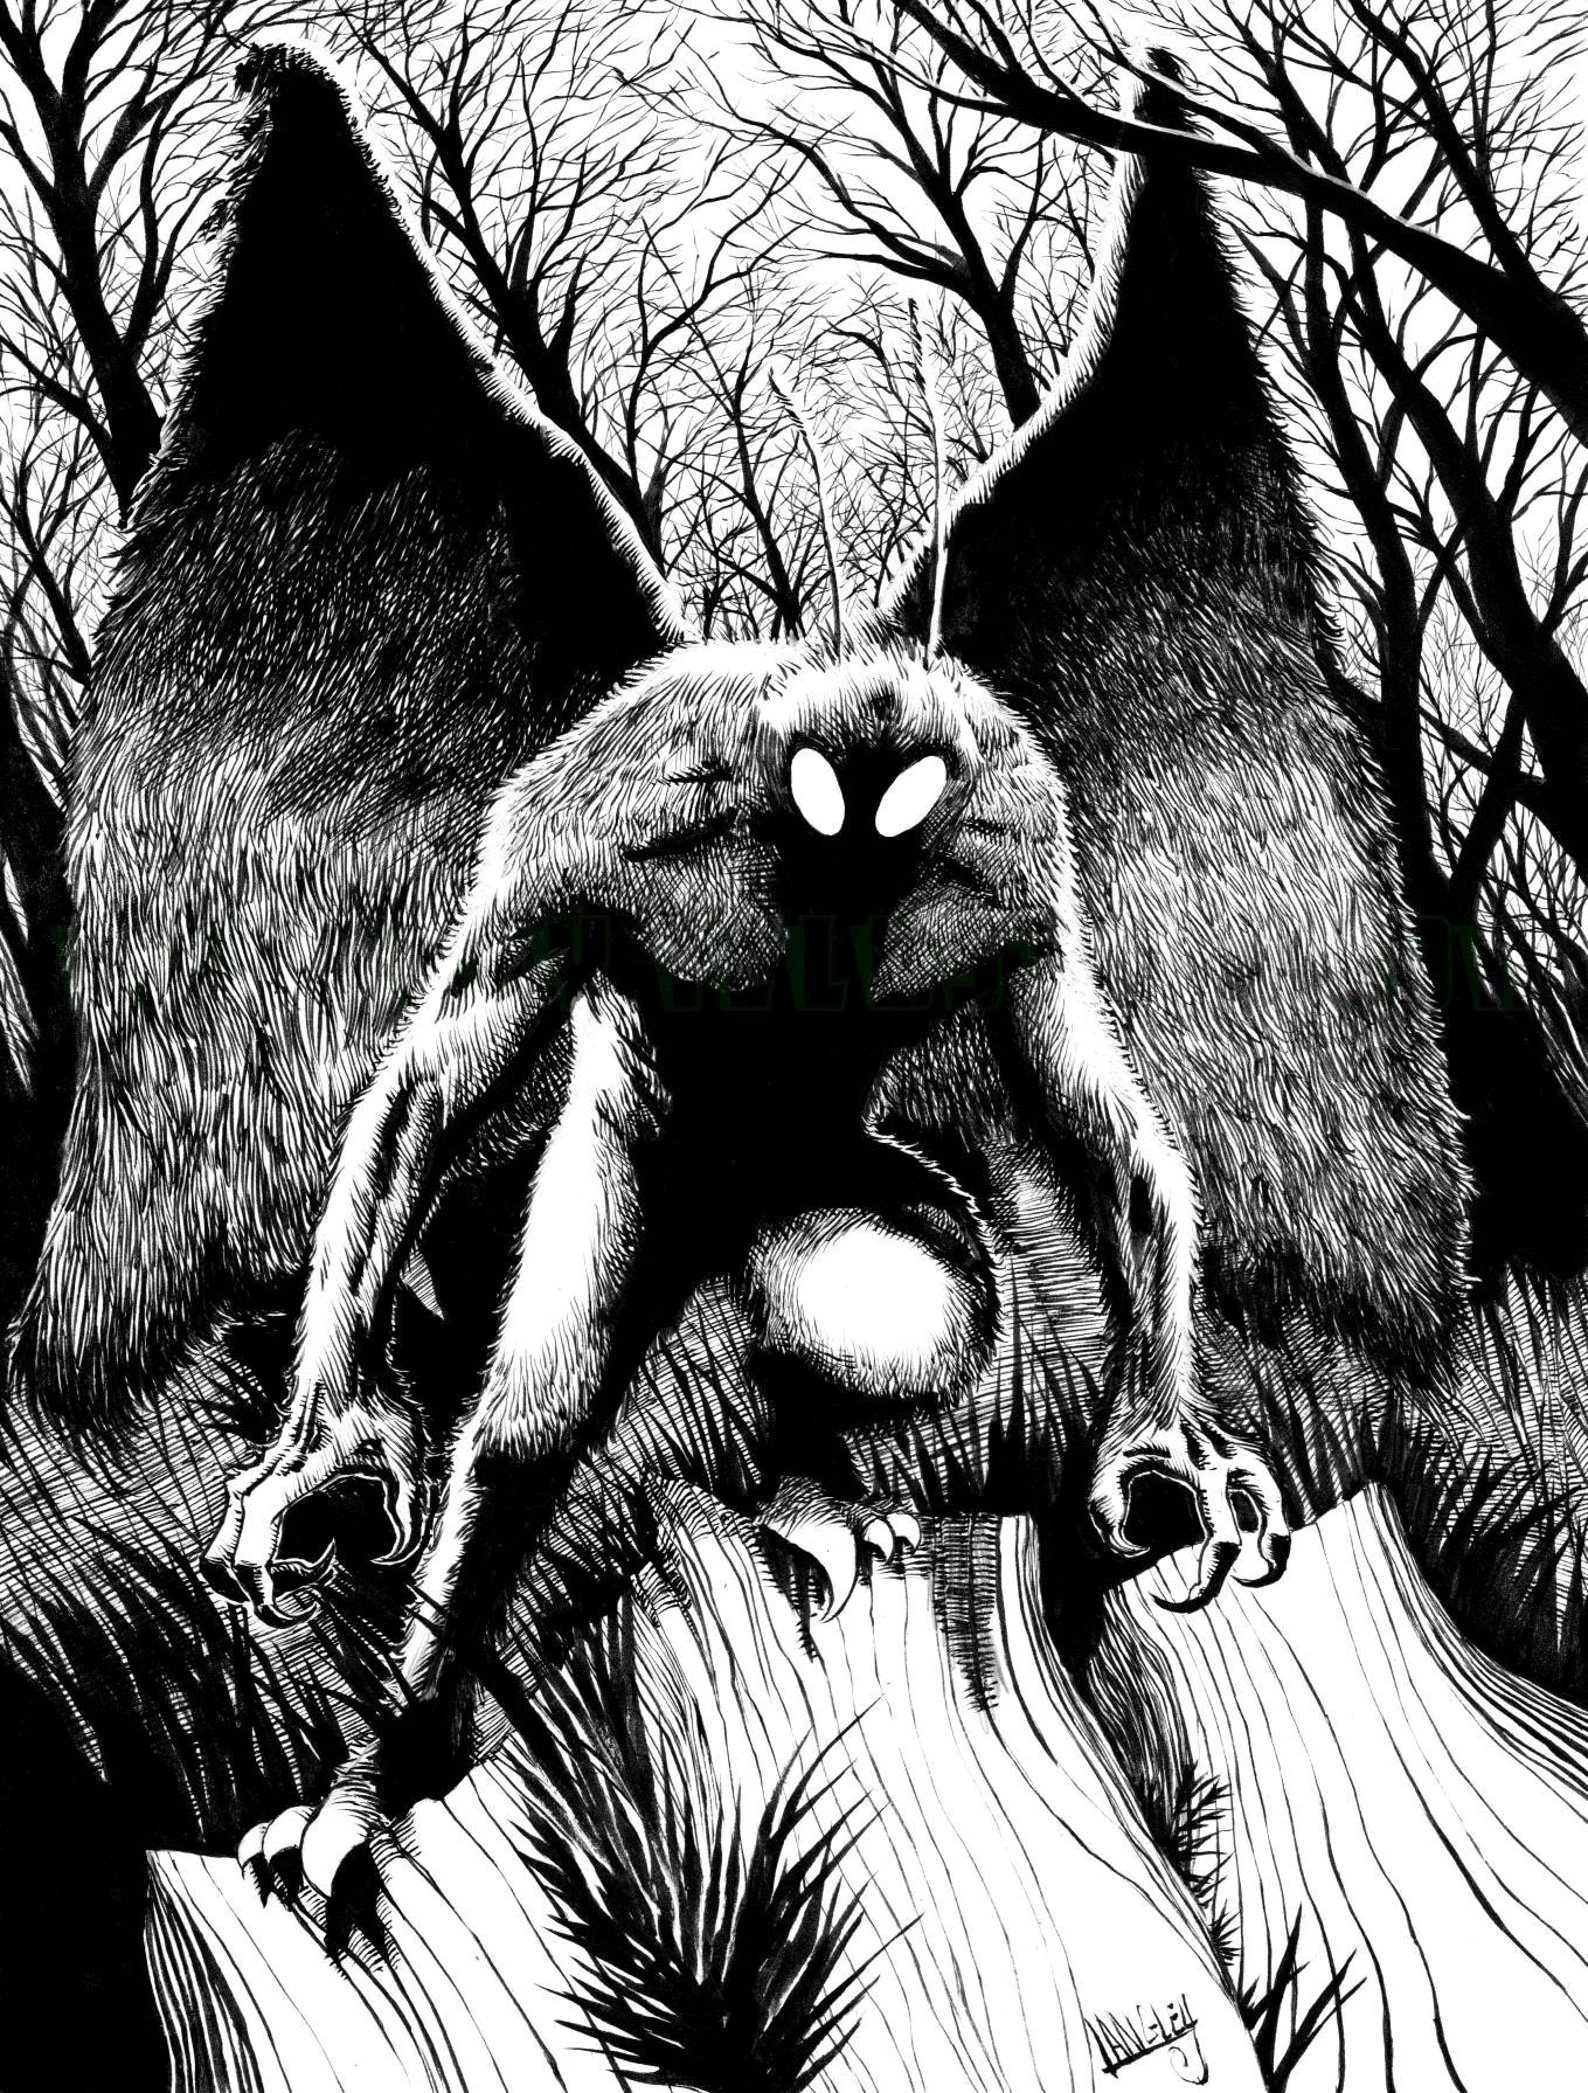 A moth-like creature with horns, large furry wings and white eyes stands on a tree stump in a dark forest.